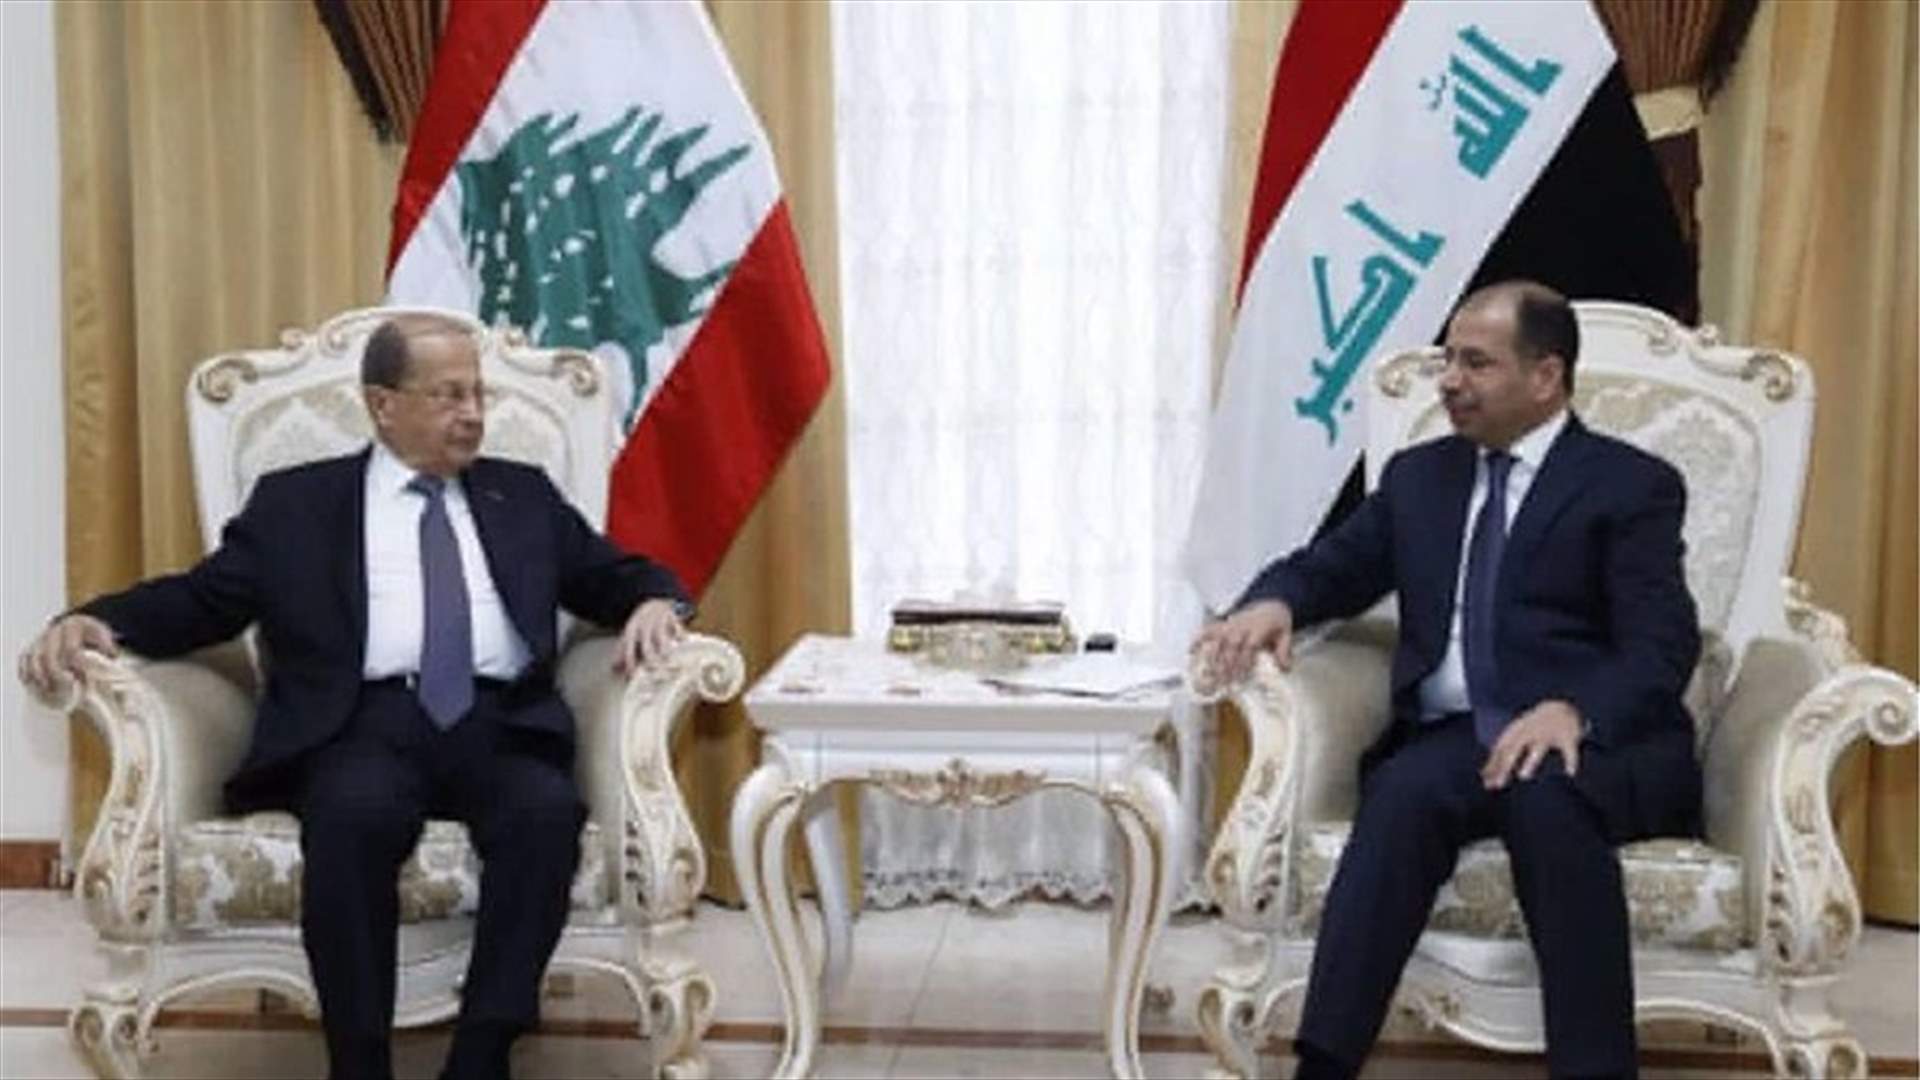 President Aoun meets with al-Jabouri and Allawi in Baghdad, stresses unity of Arab position